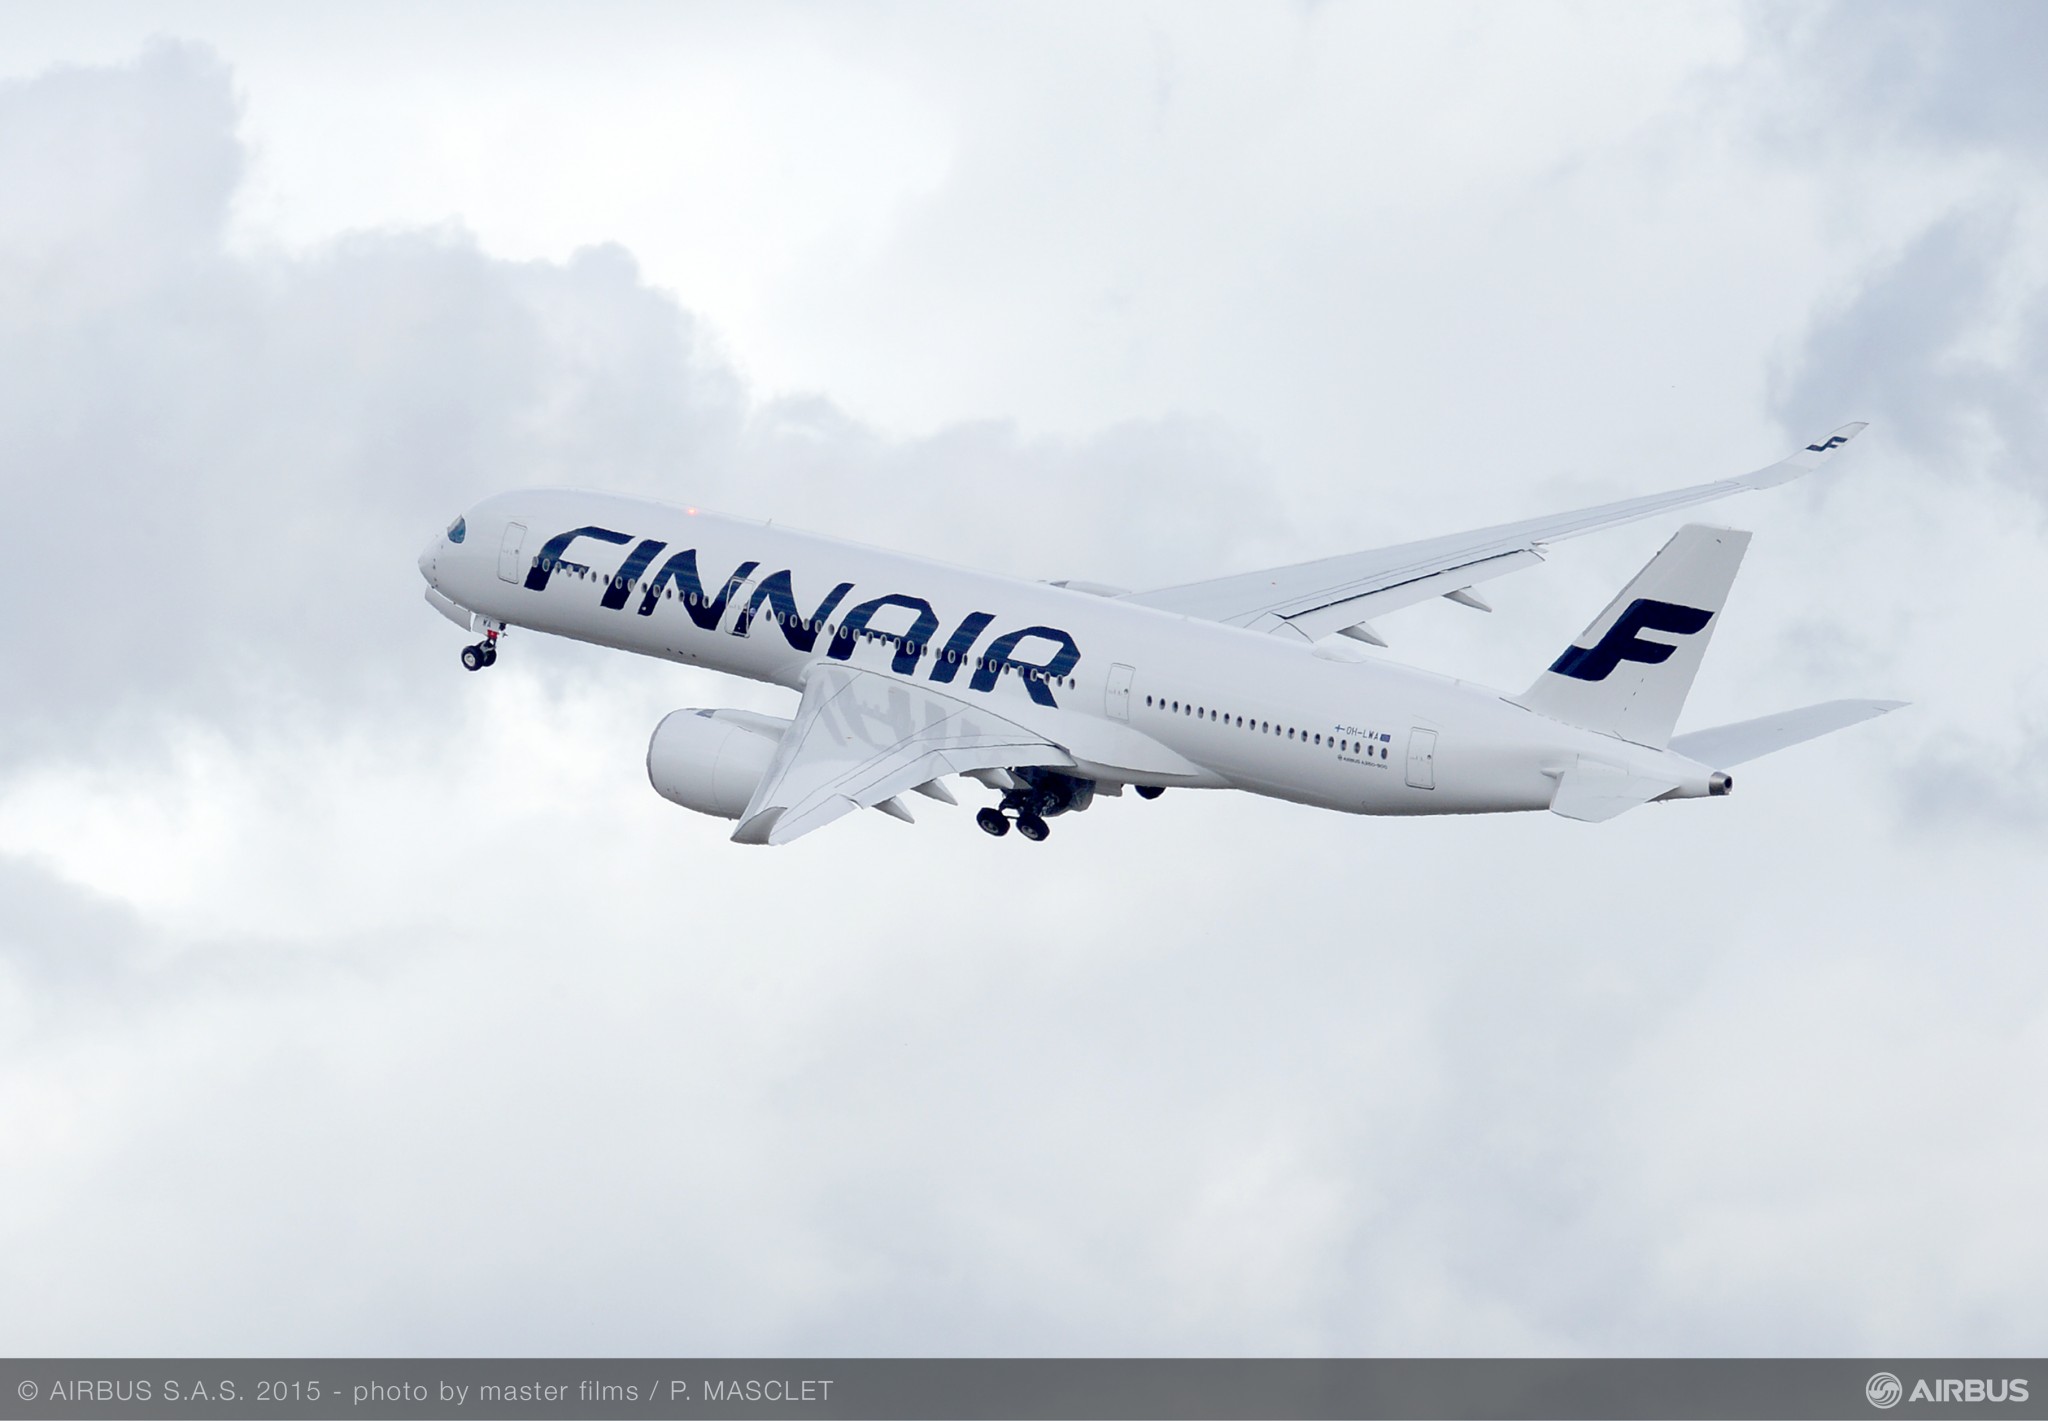 Finnair set to appoint new chief digital officer and executive board member